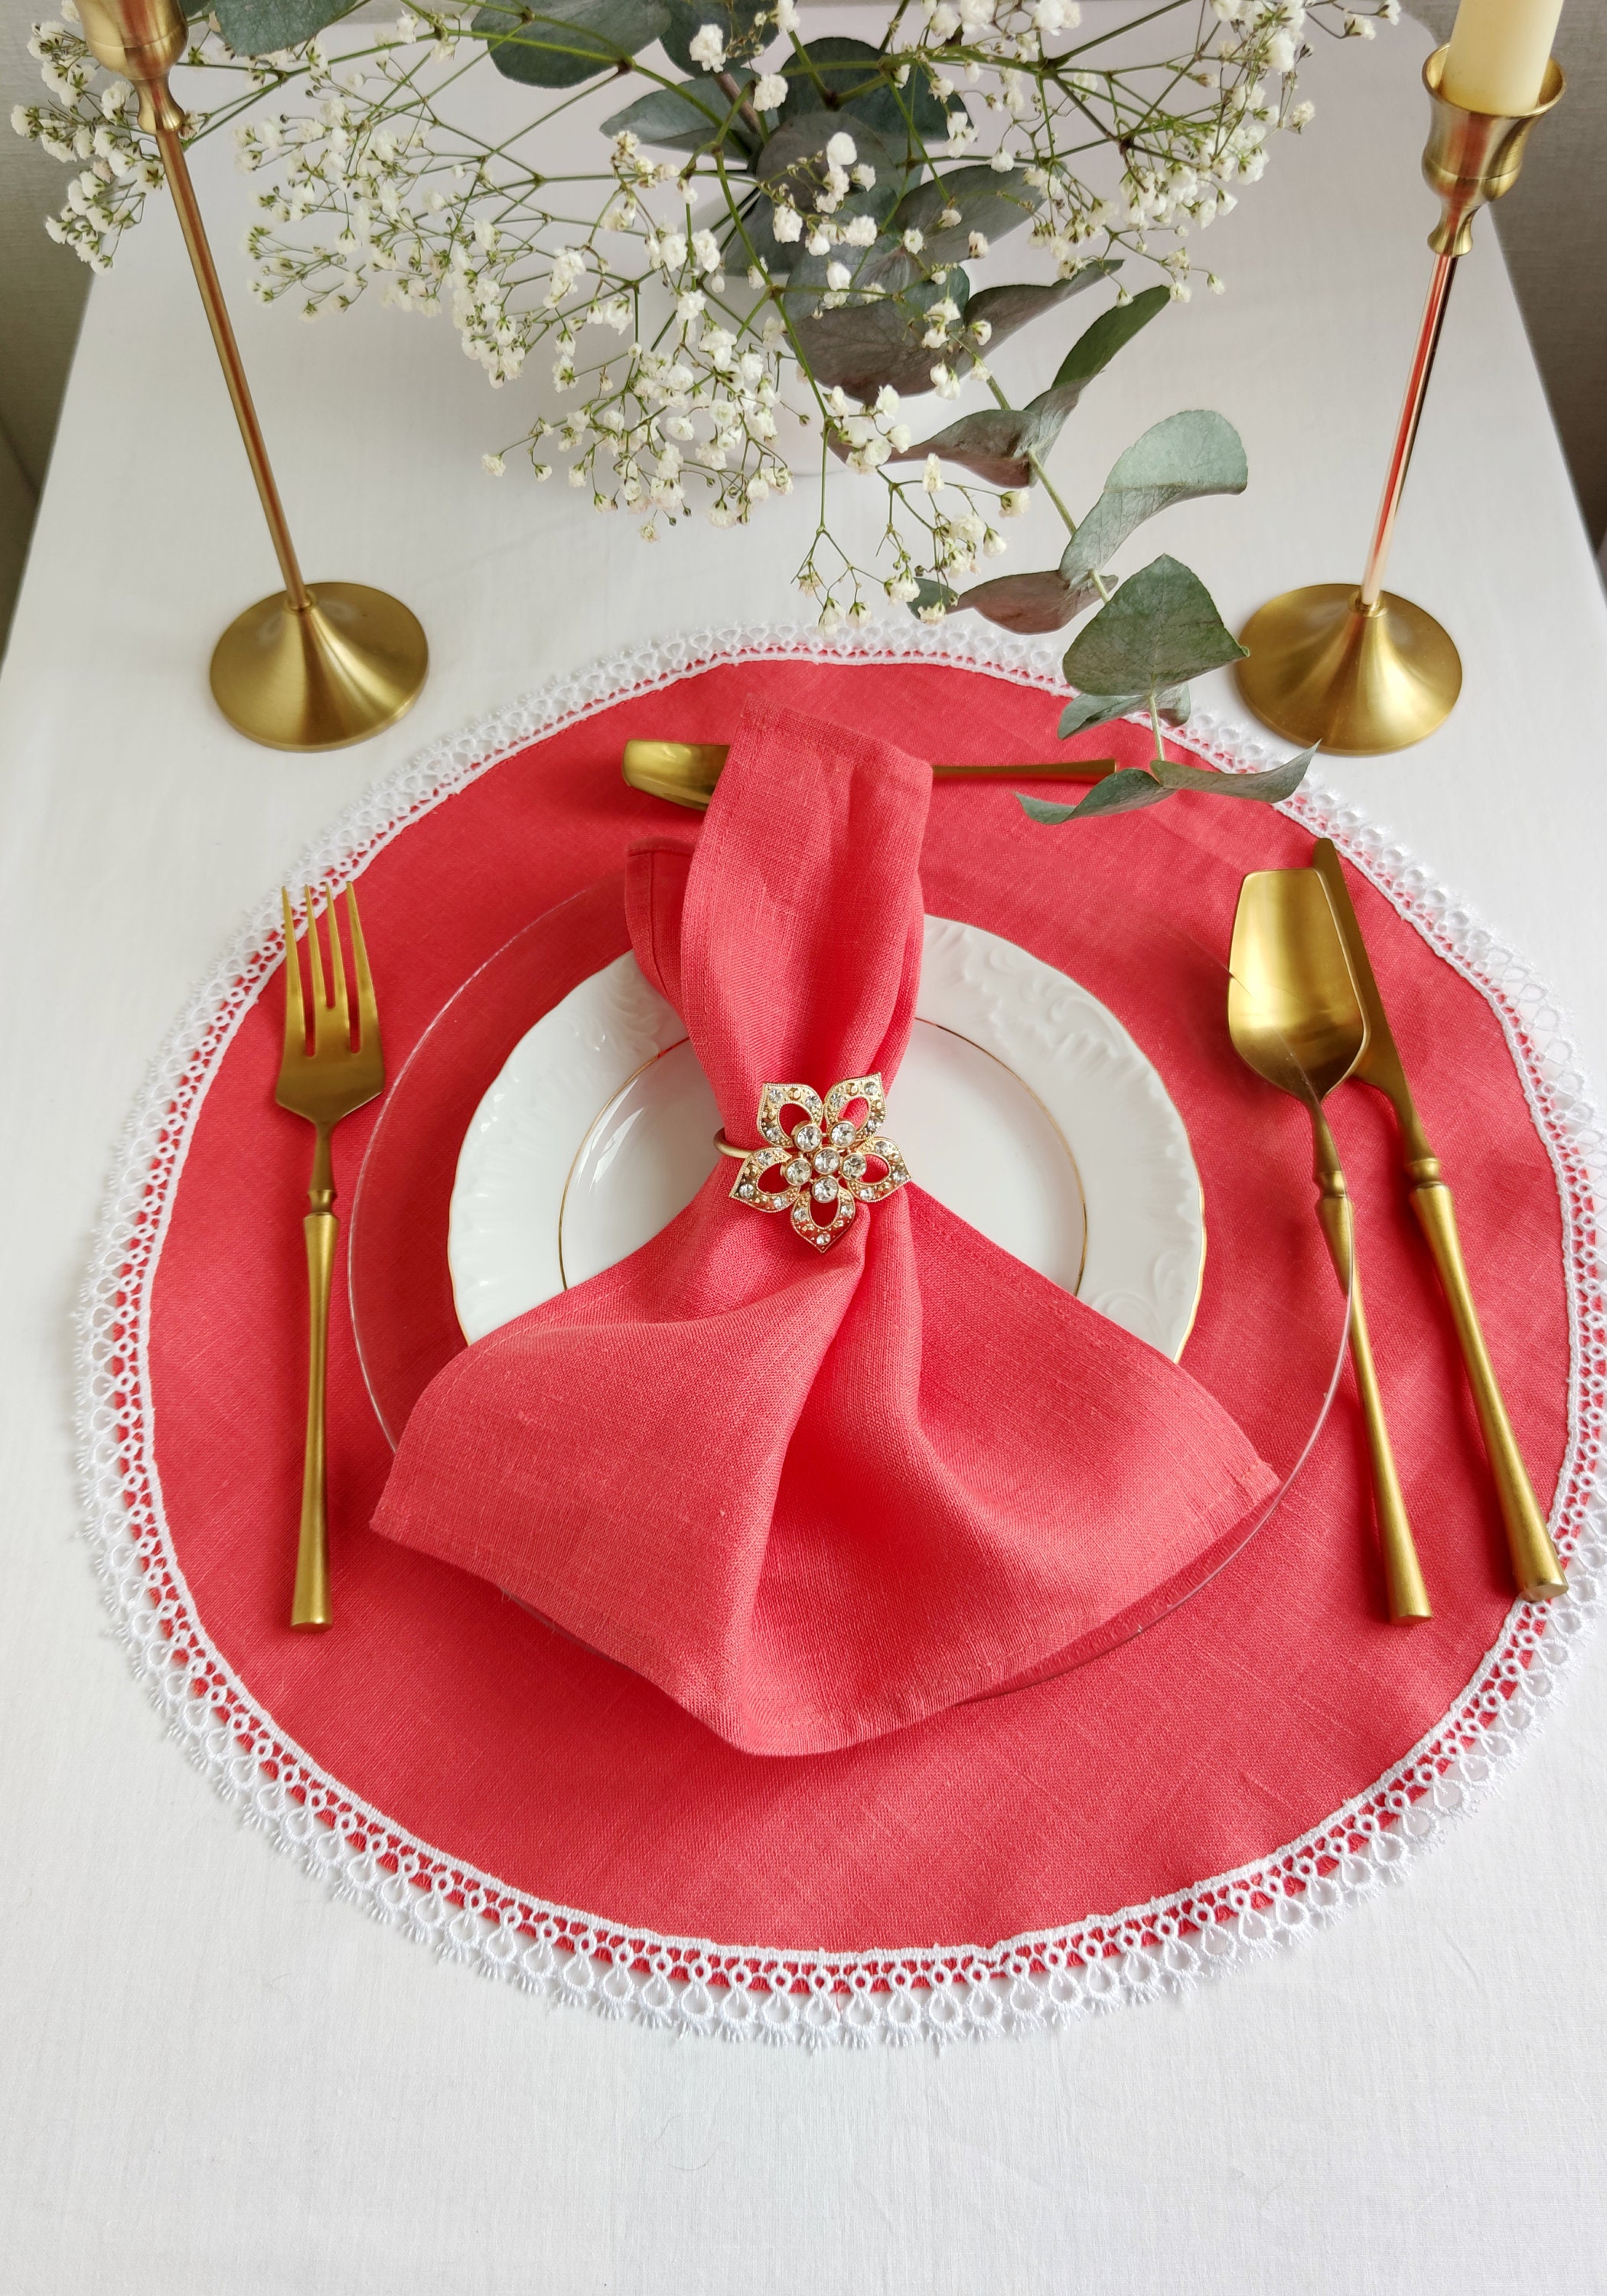 SO BEAUTIFUL! 12 DAYS OF CHRISTMAS LINEN NAPKINS BOXED SET W/GOLD COLOR